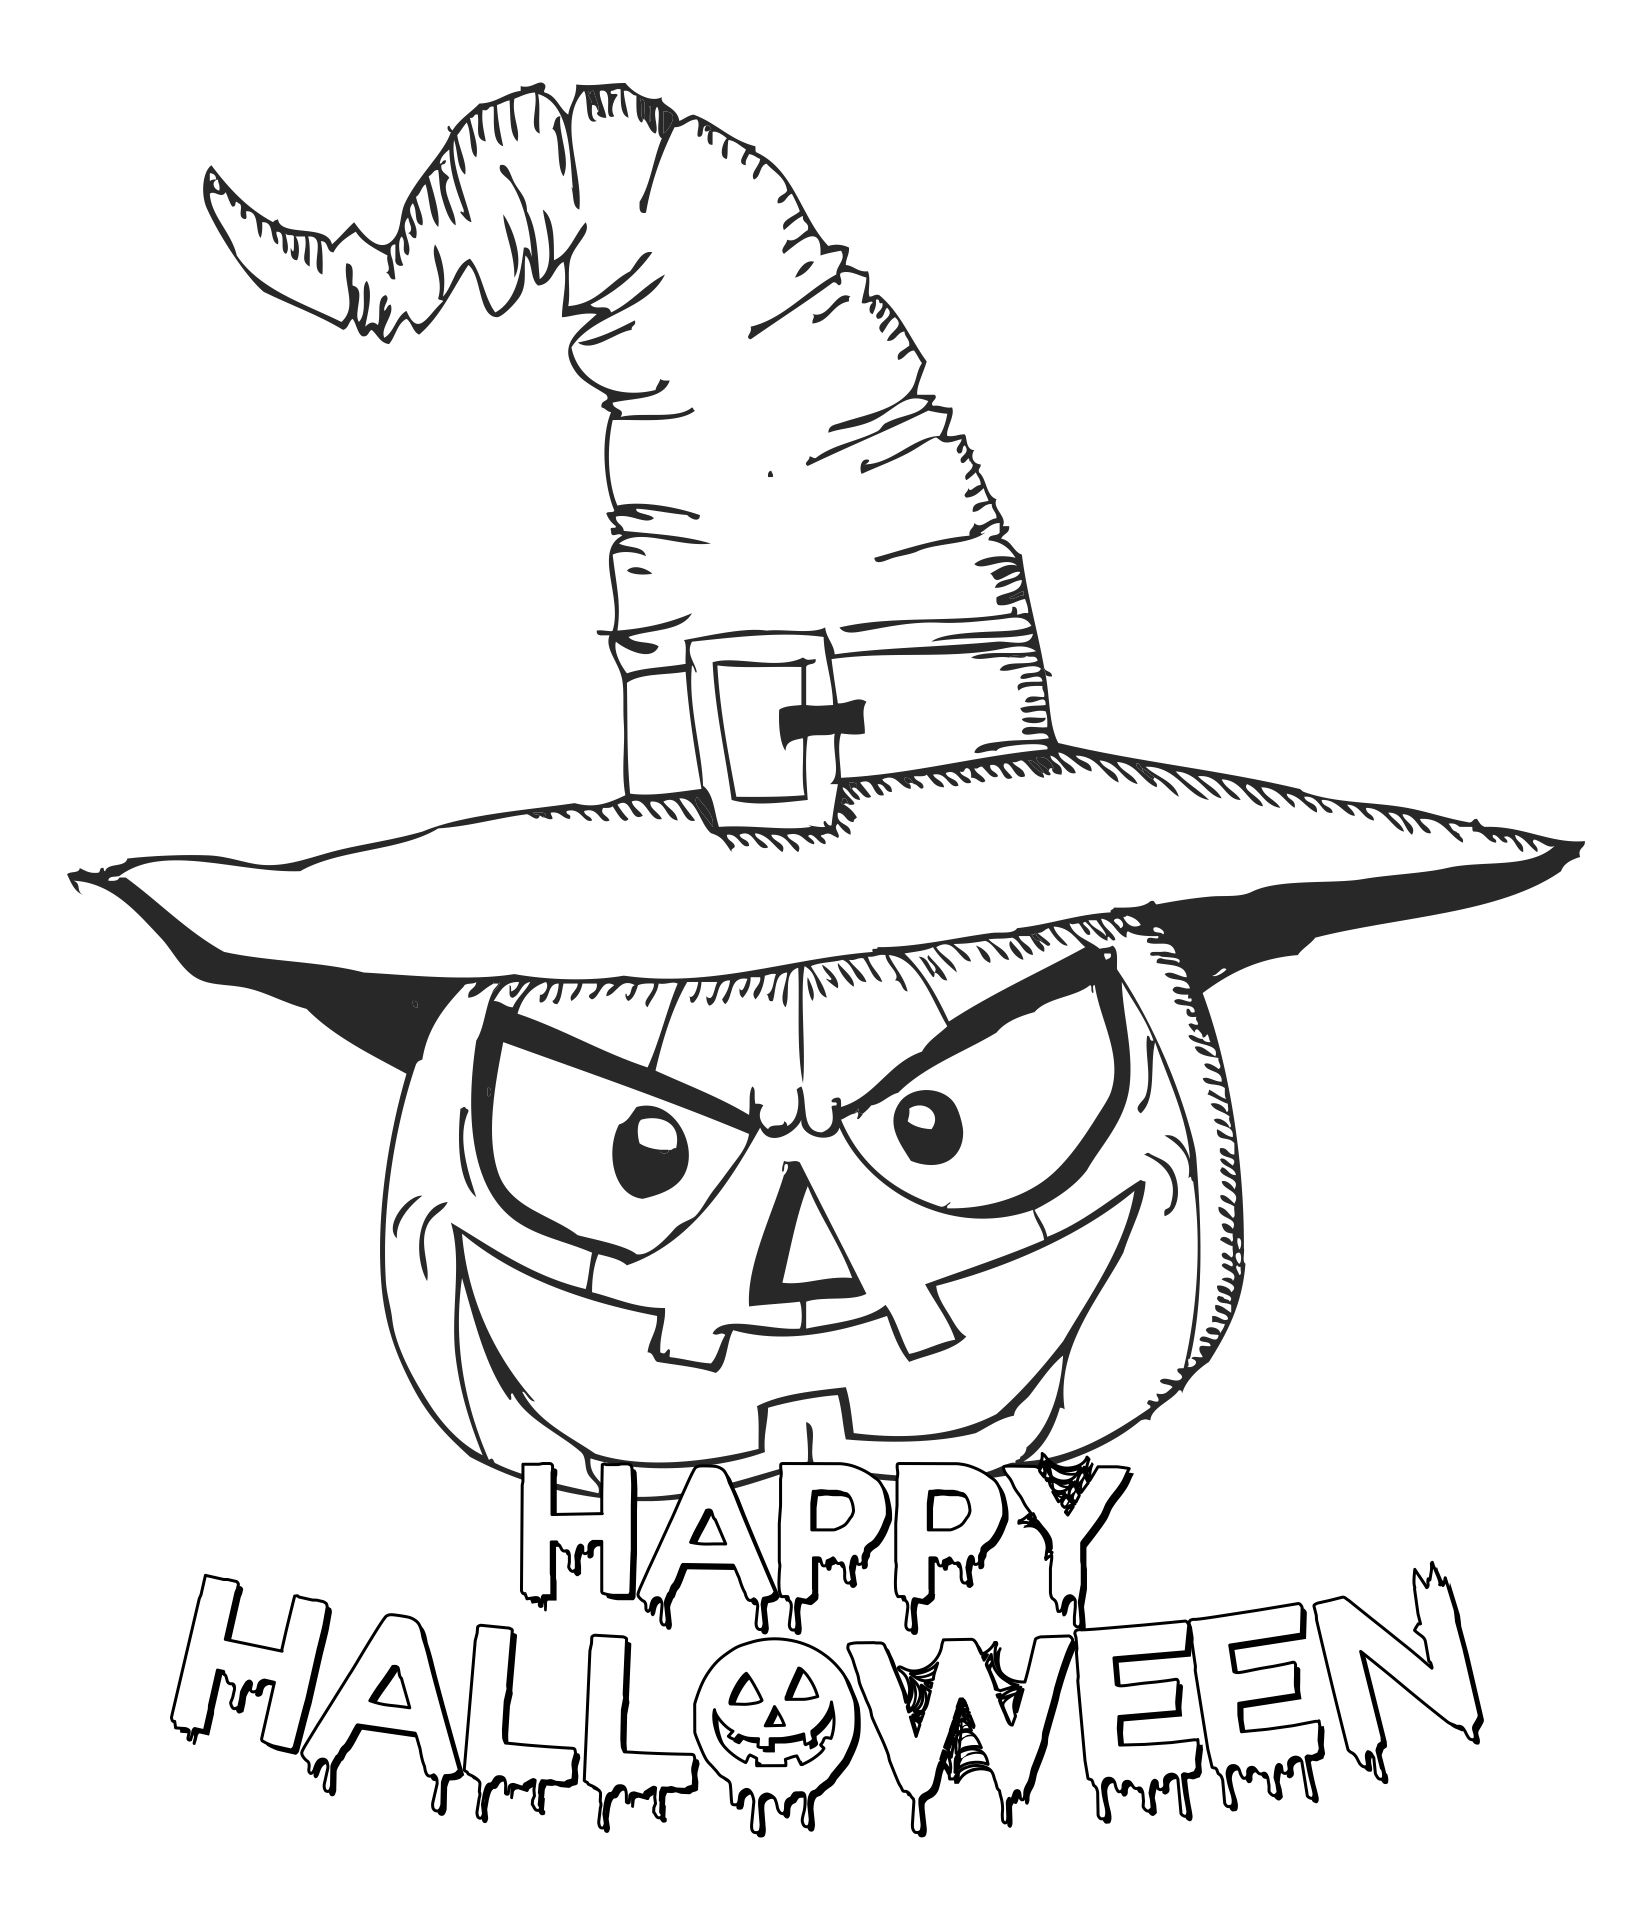 Printable Scary Halloween Coloring Pages